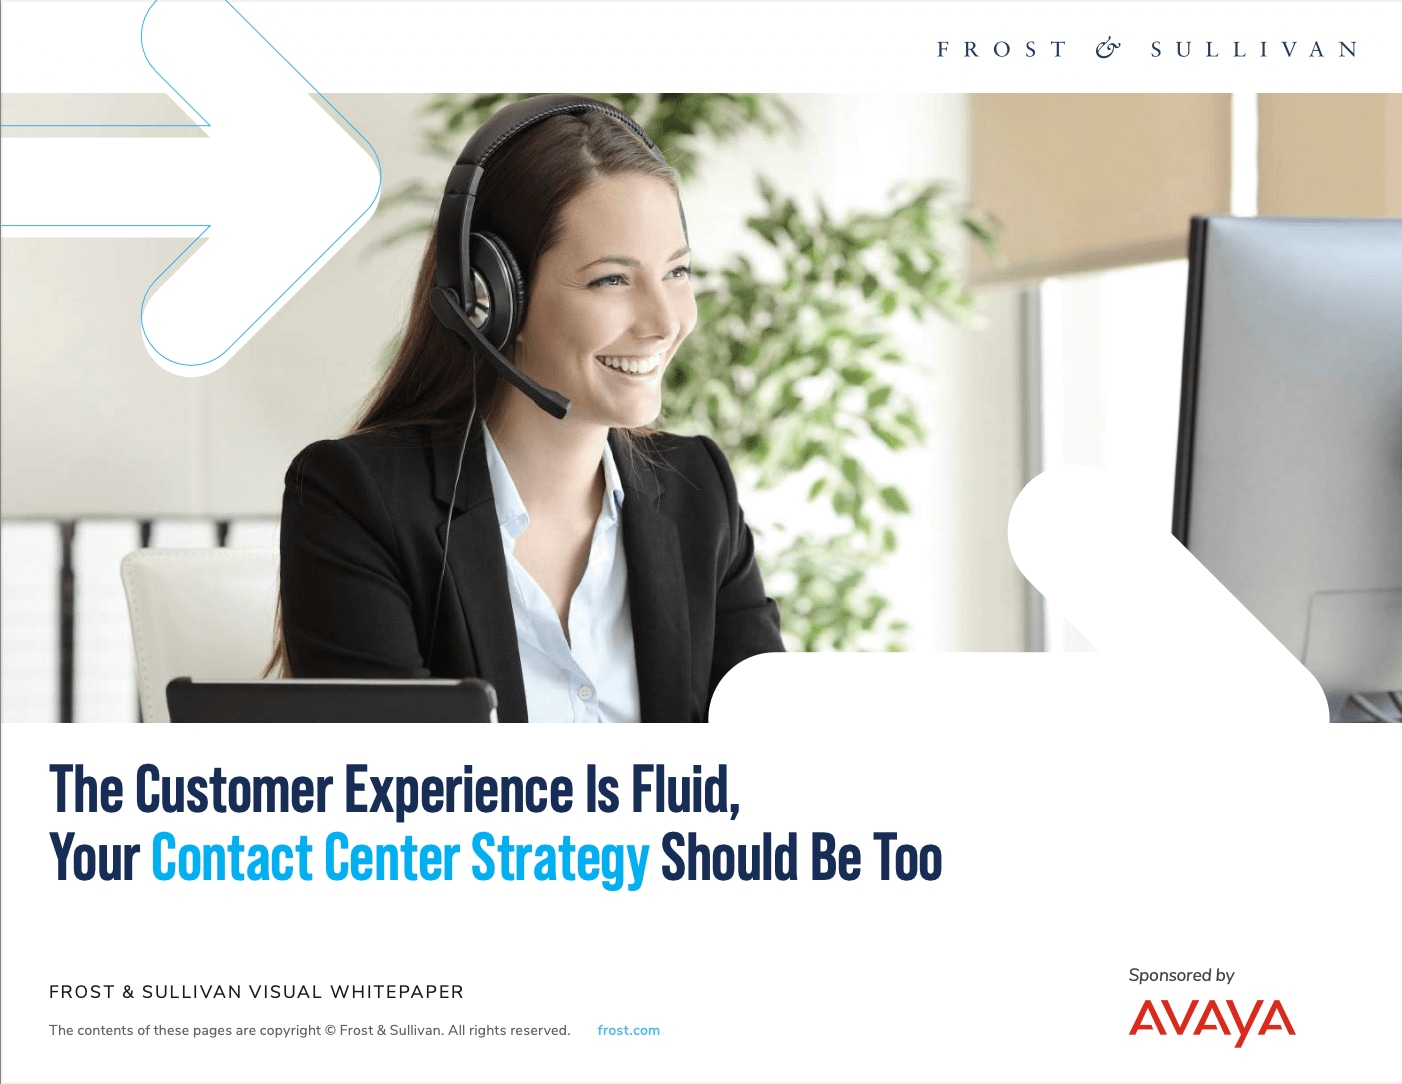 The Customer Experience Is Fluid, Your Contact Center Strategy Should Be Too